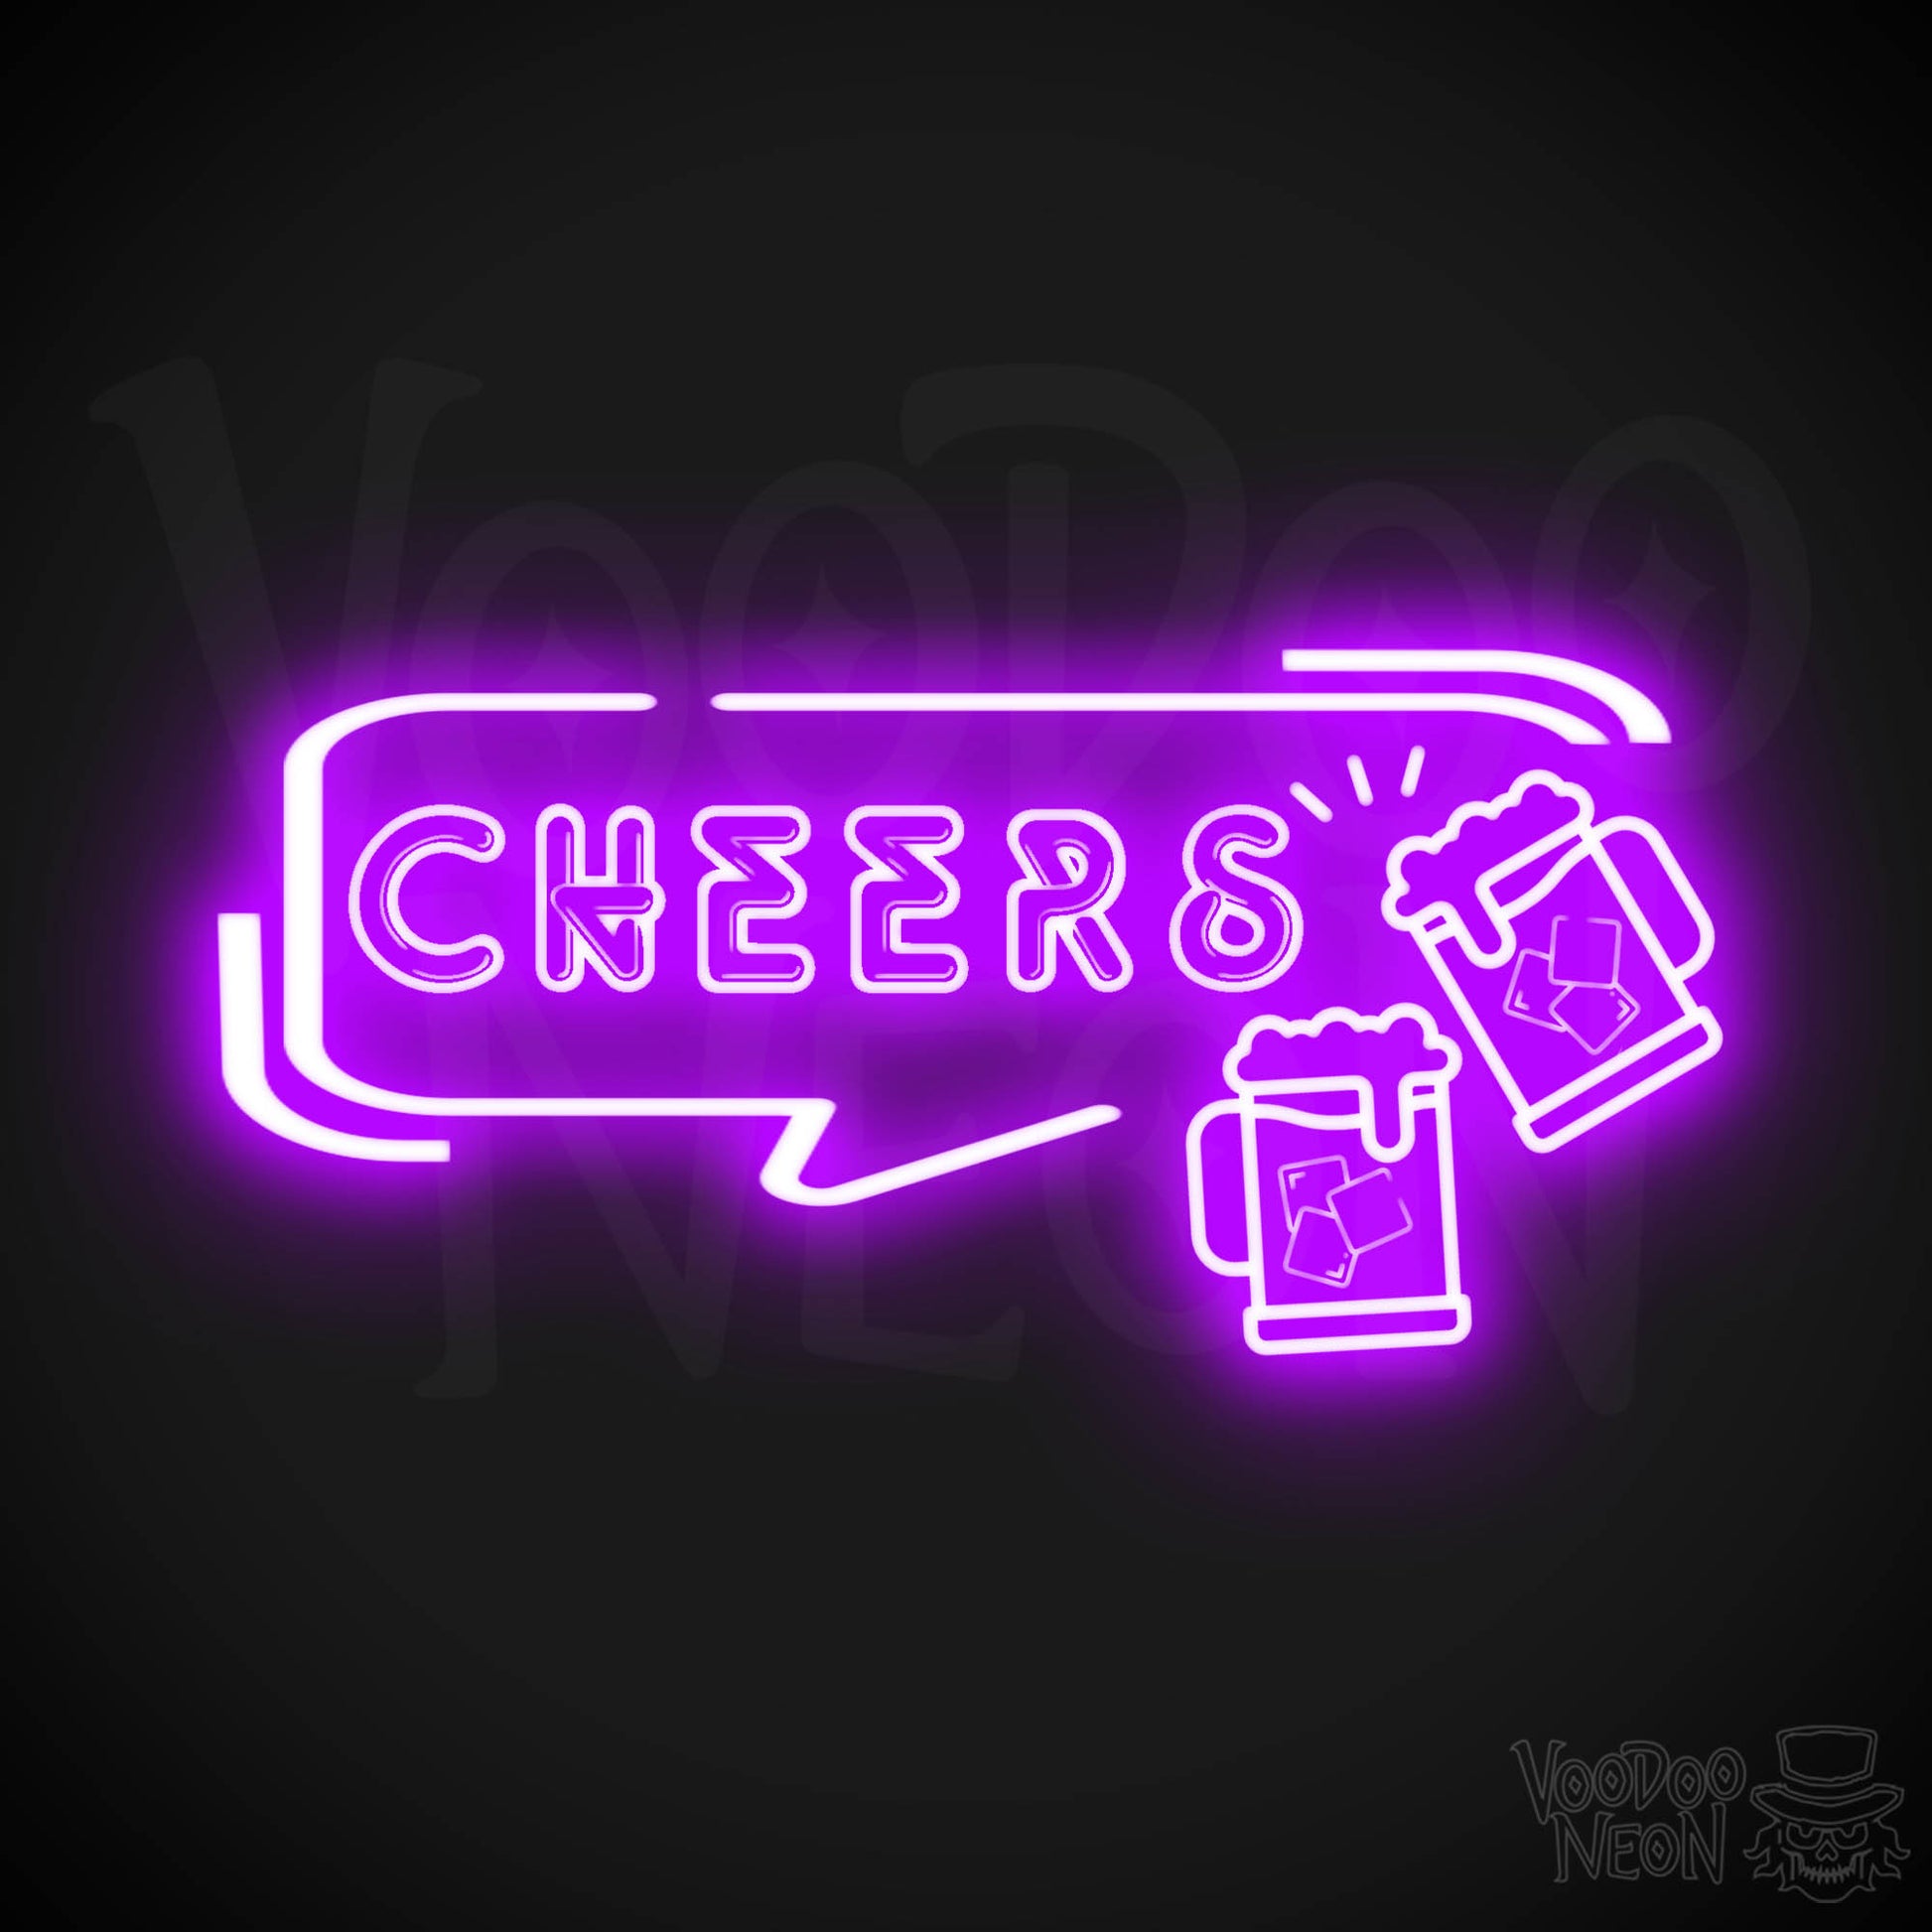 Cheers Neon Sign - Neon Cheers Bar Sign - LED Neon Wall Art - Color Purple